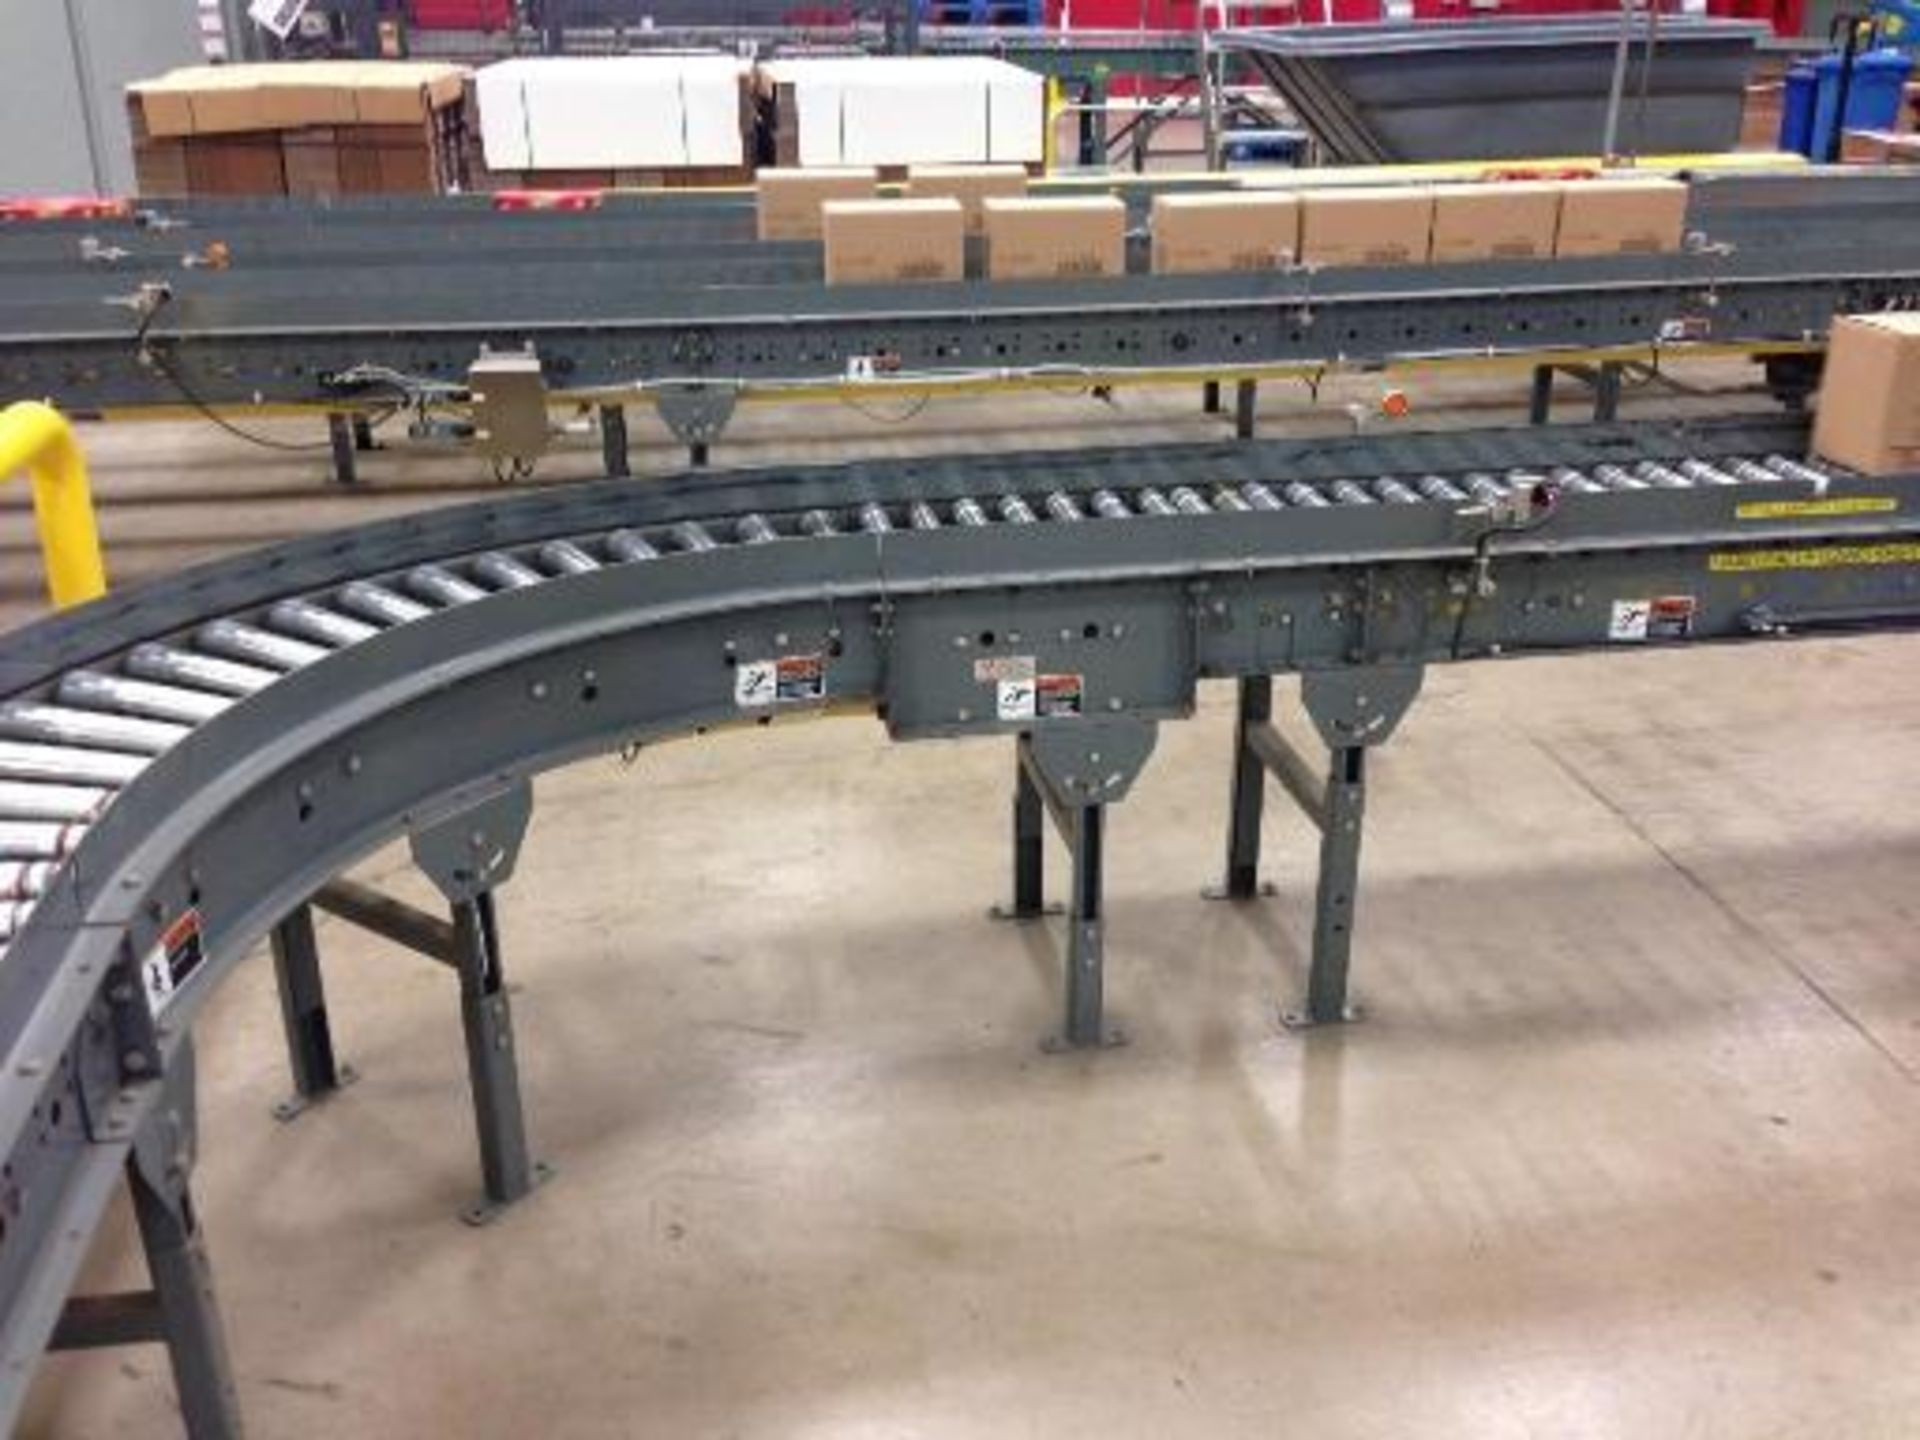 Versa power roller conveyor 60 feet long (line 12) right to left. Located in Marion, Ohio Rigging